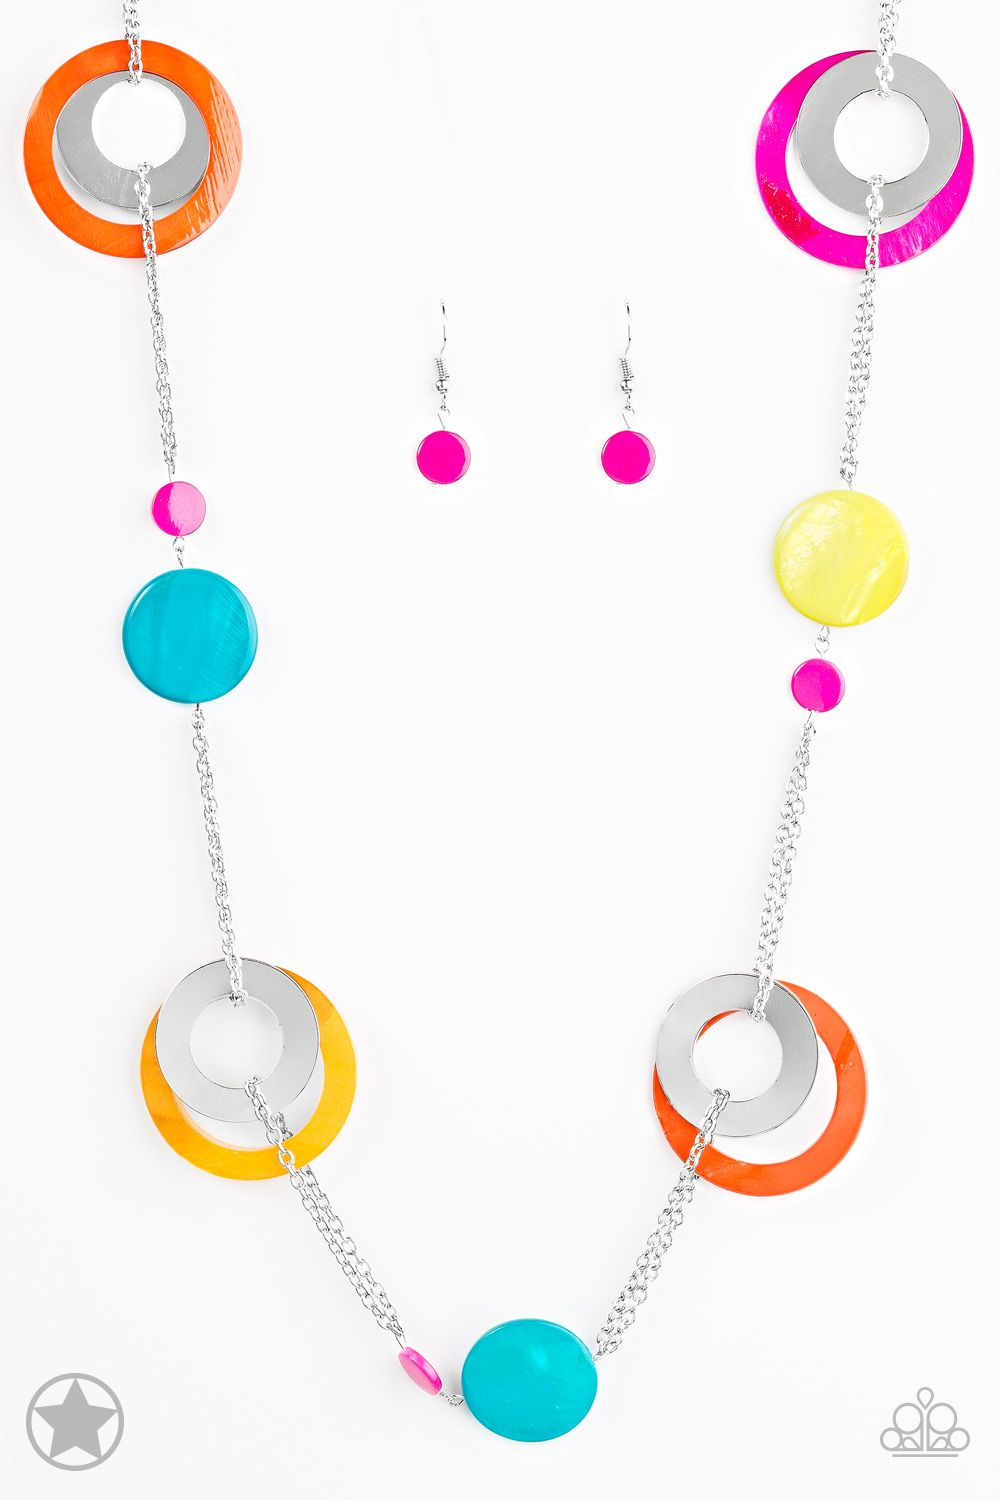 Kaleidoscopically Captivating Necklace - $5 * Chunky brightly-colored rings  and discs with swirly marble finishes join thick metal hoops to climb a  simple